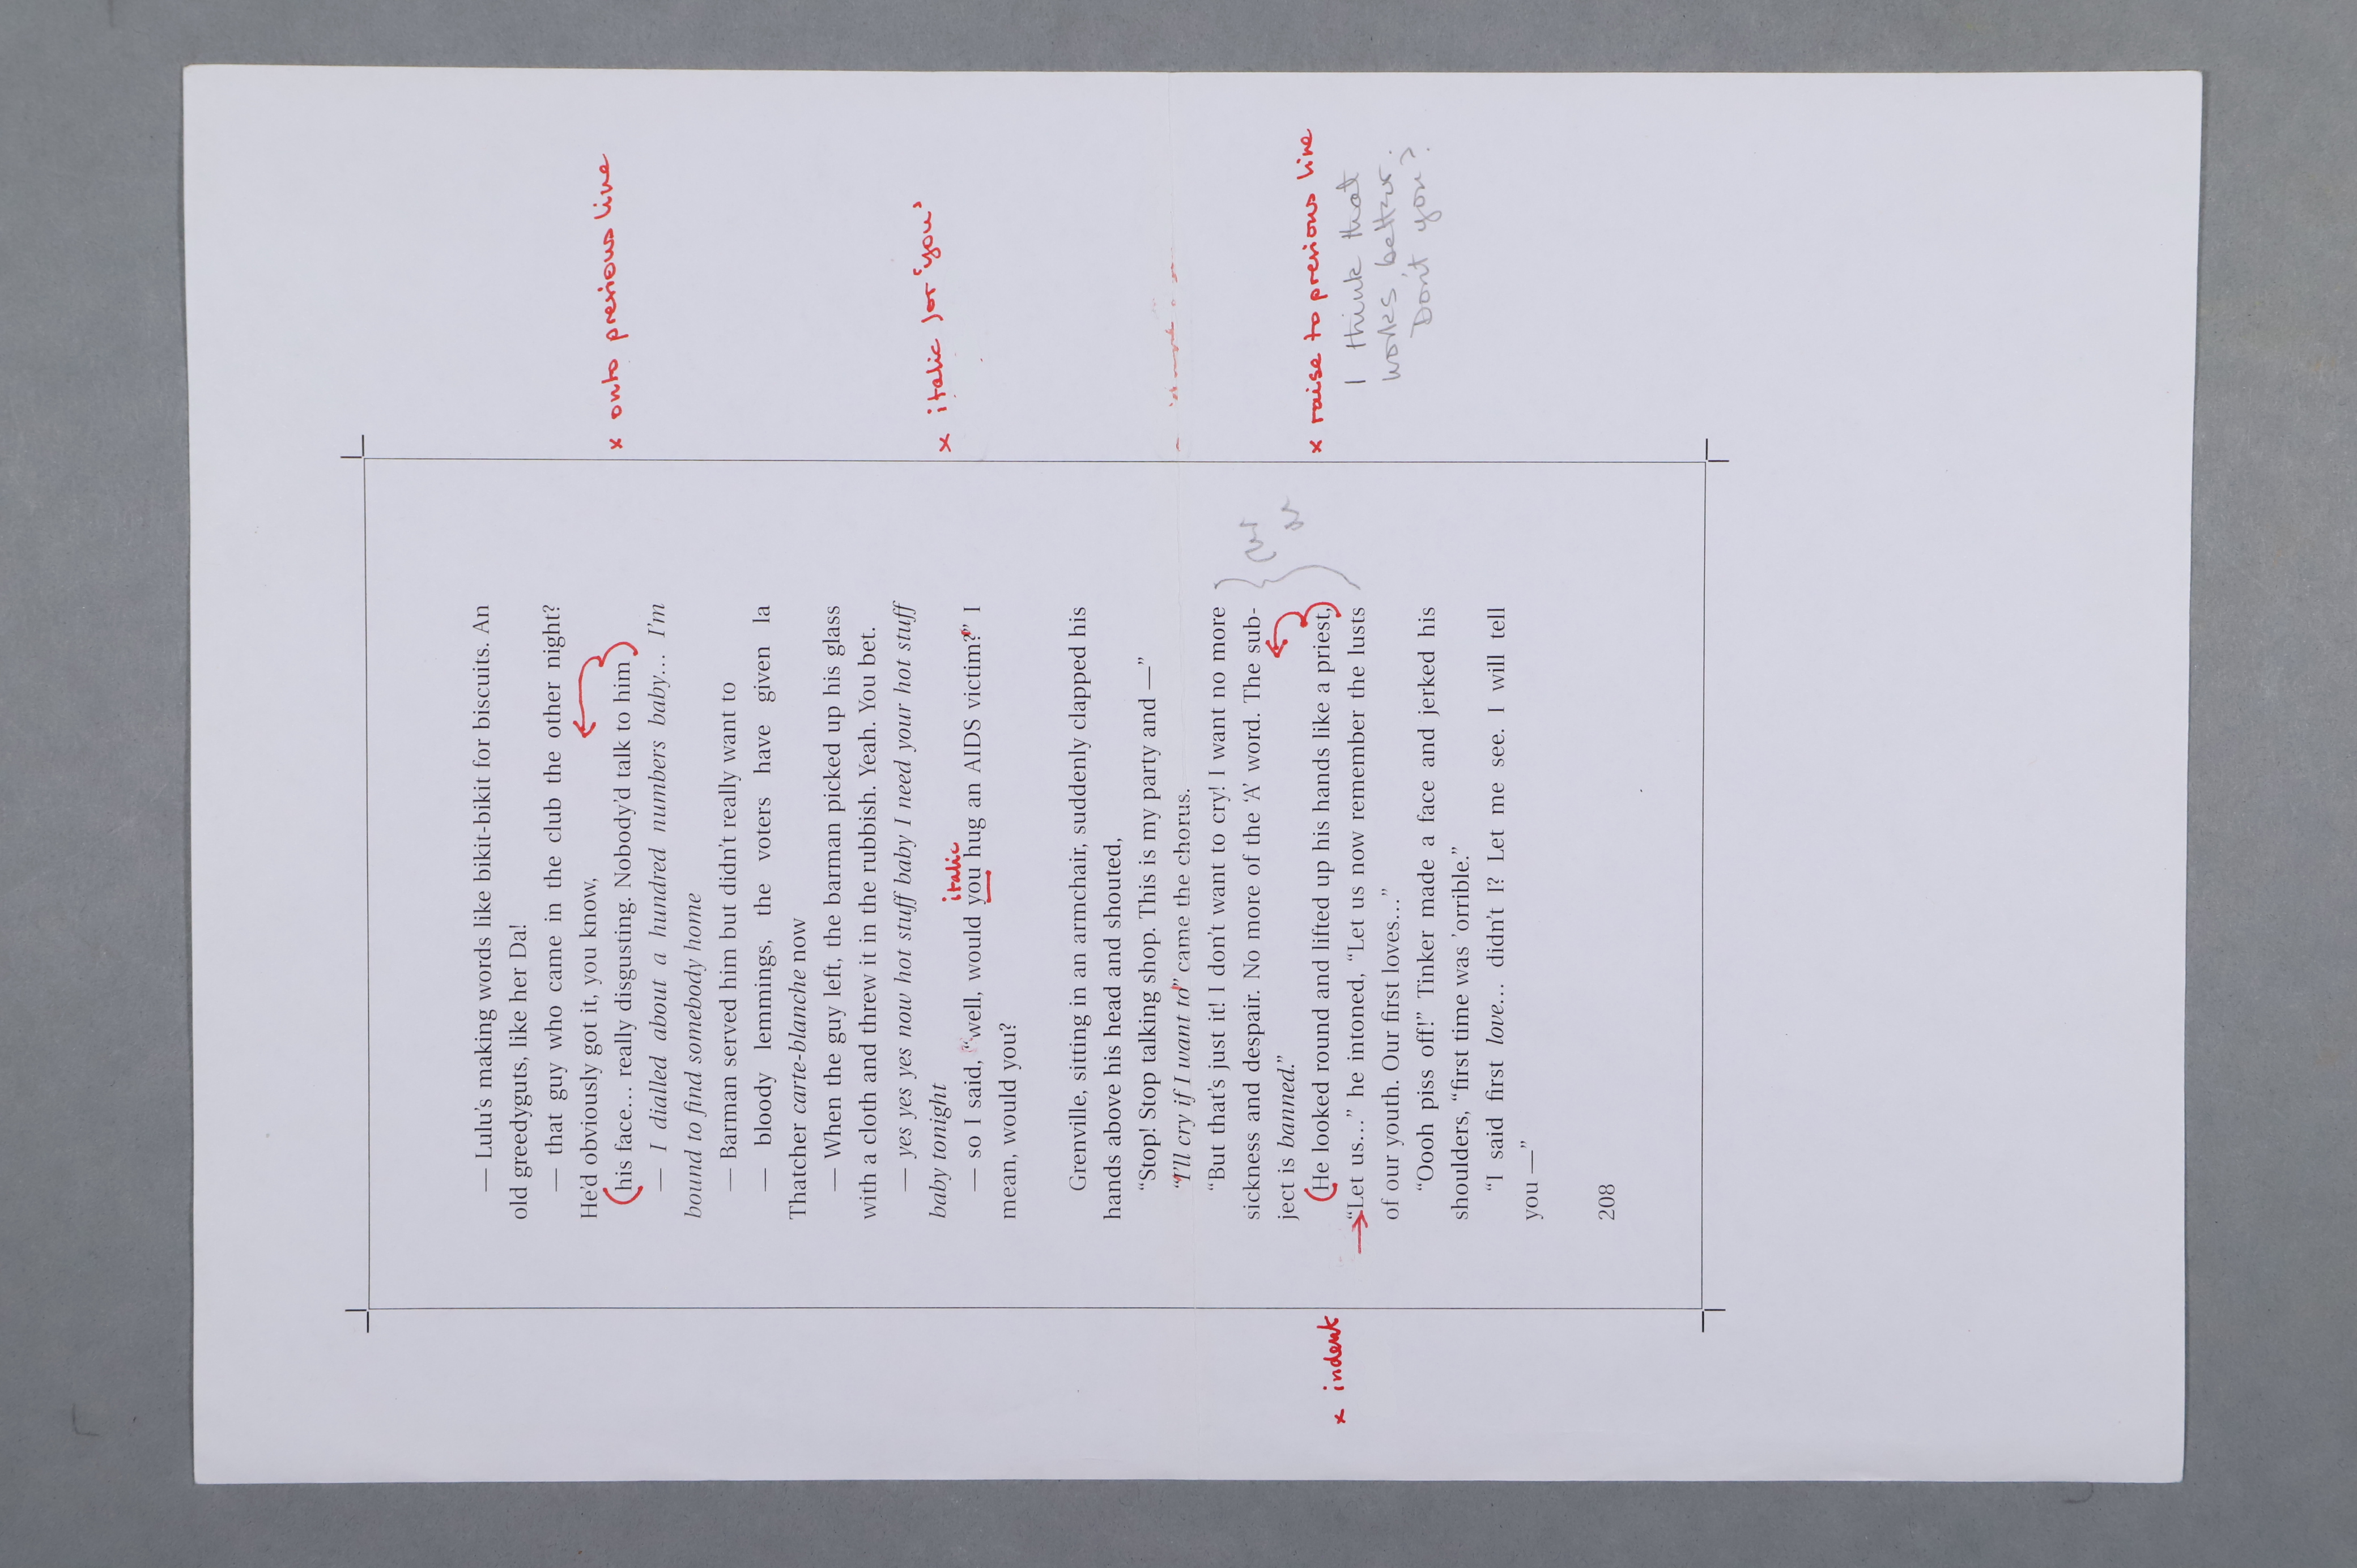 Printer's proof of a story, including manuscript annotations in pencil and red ink.